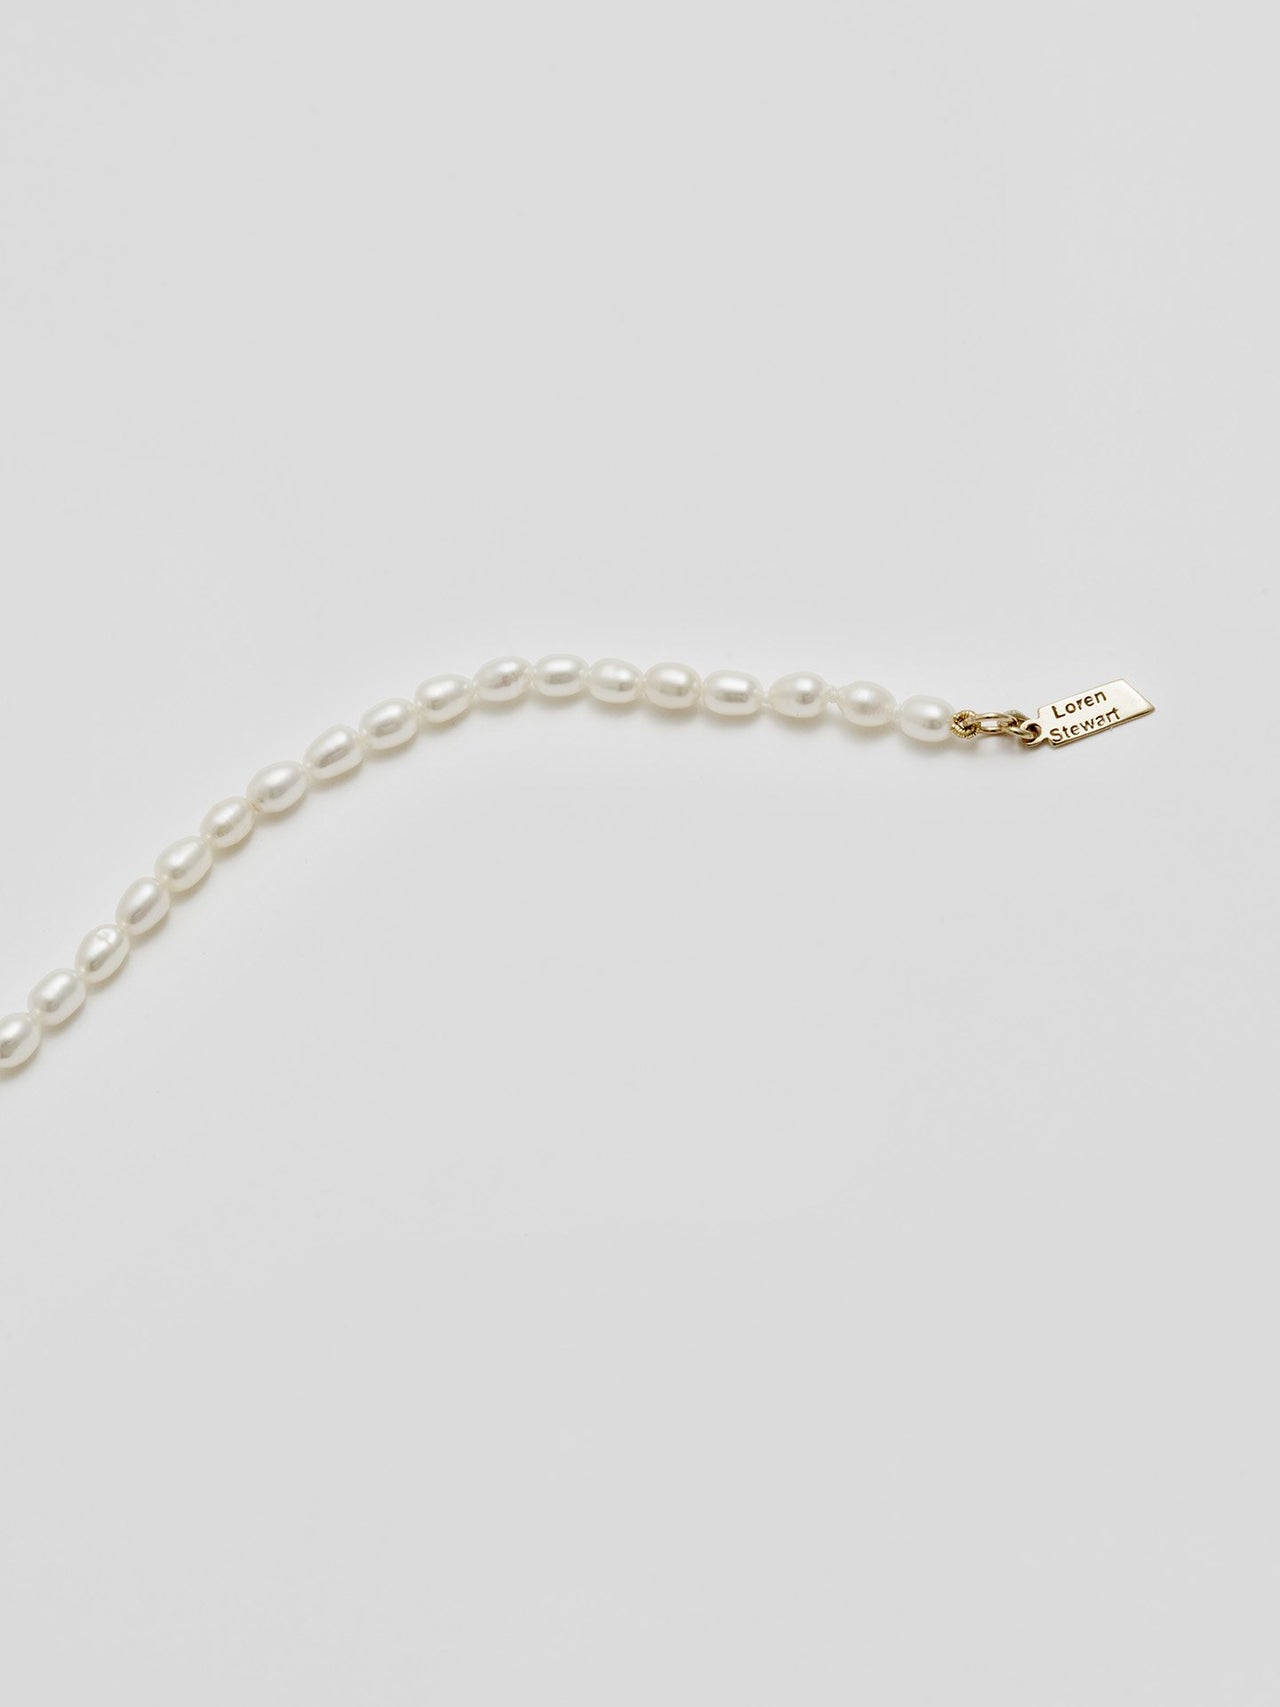 Product shot of White Rice Pearl Anklet including logo. Light grey background. 